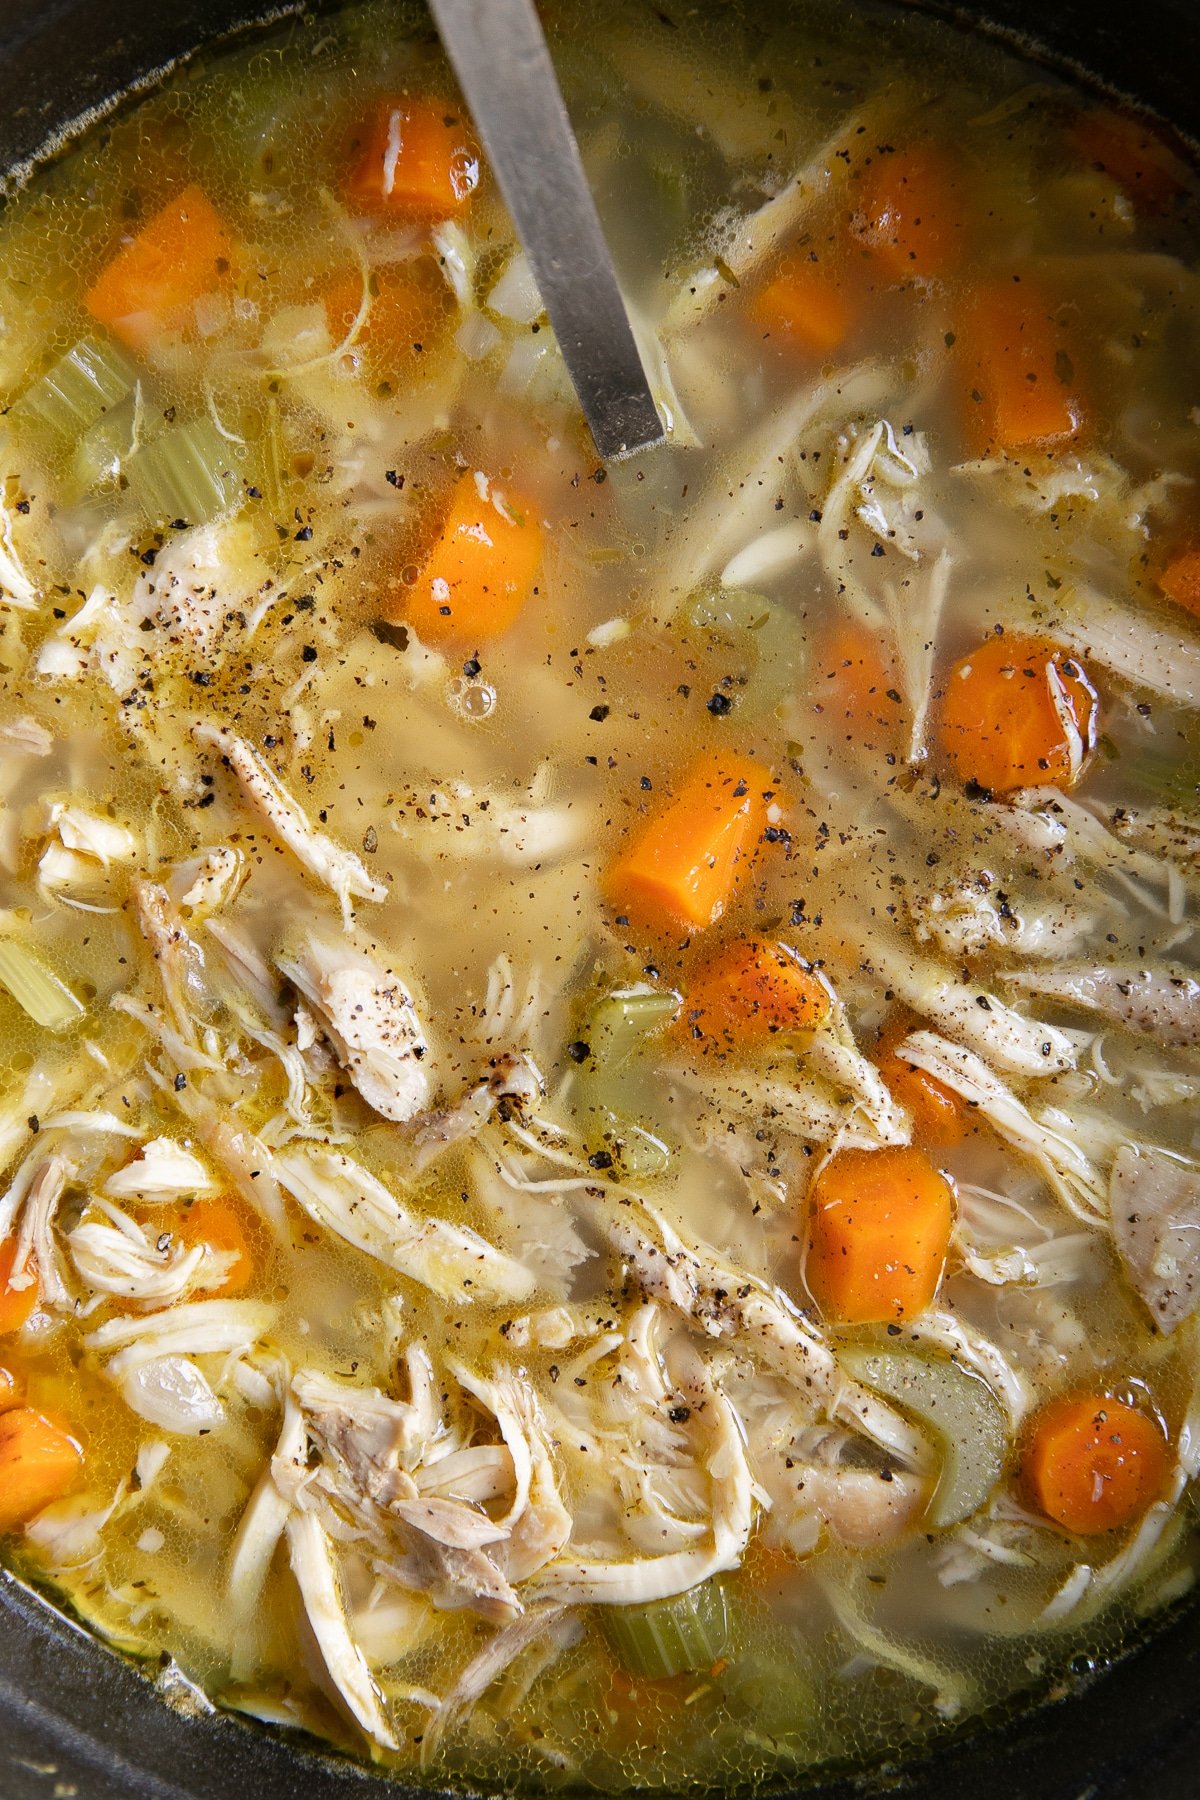 Large pot filled with homemade chicken soup recipe made with chicken, carrots, celery, and broth.